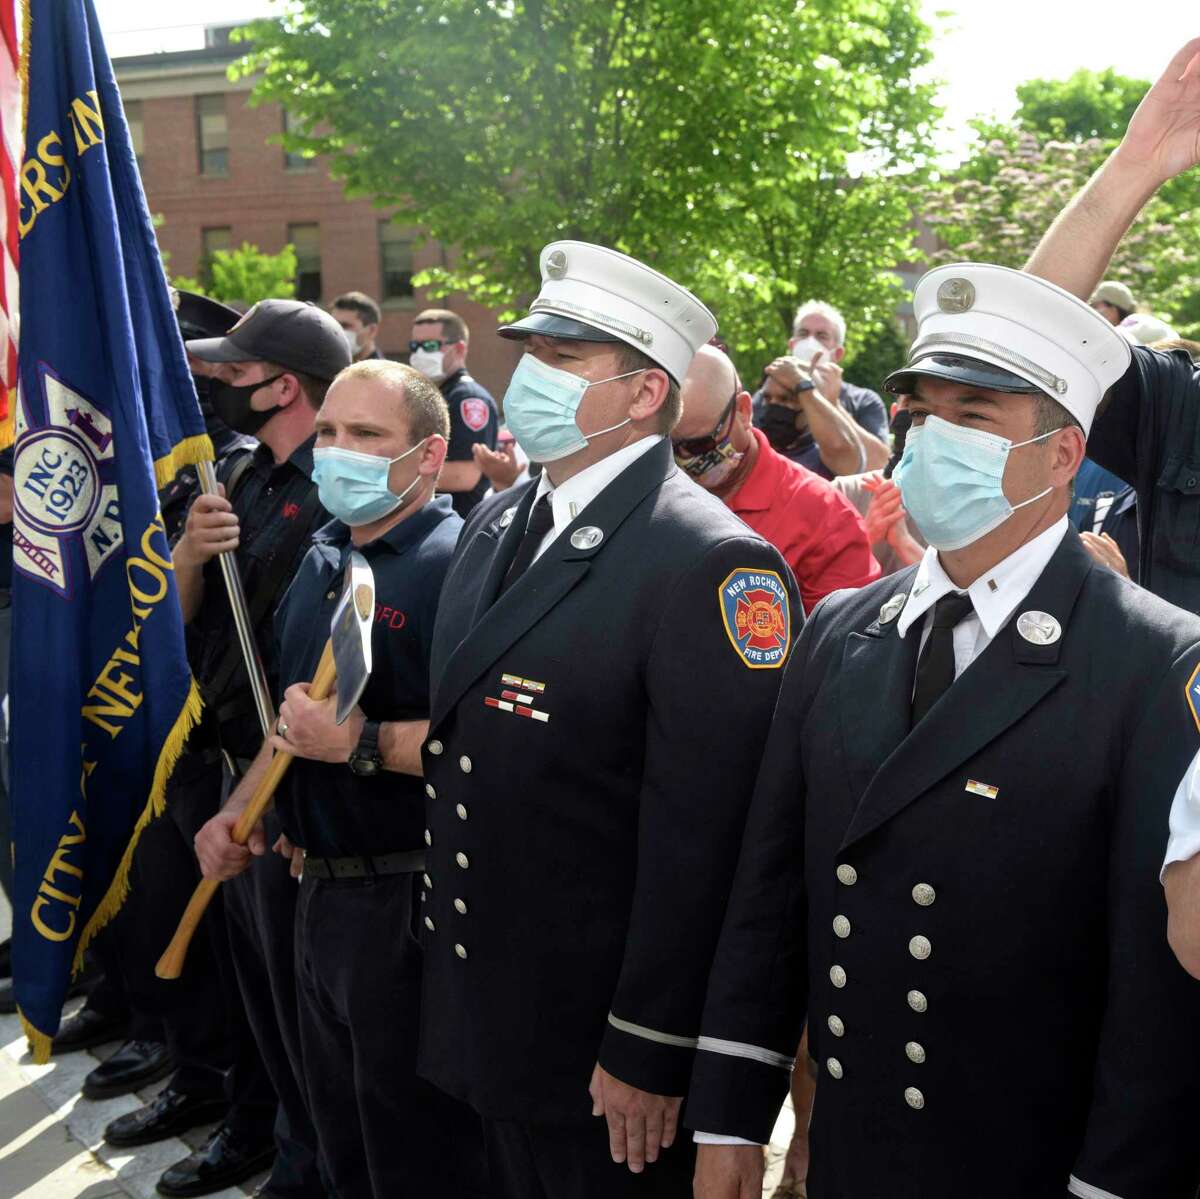 Members of the New Rochelle Fire Department watch as John Reed, deputy fire chief from New Rochelle, N.Y., leaves Danbury Hospital, after 56 days battling the coronavirus. May 29, 2020, in Danbury, Conn.